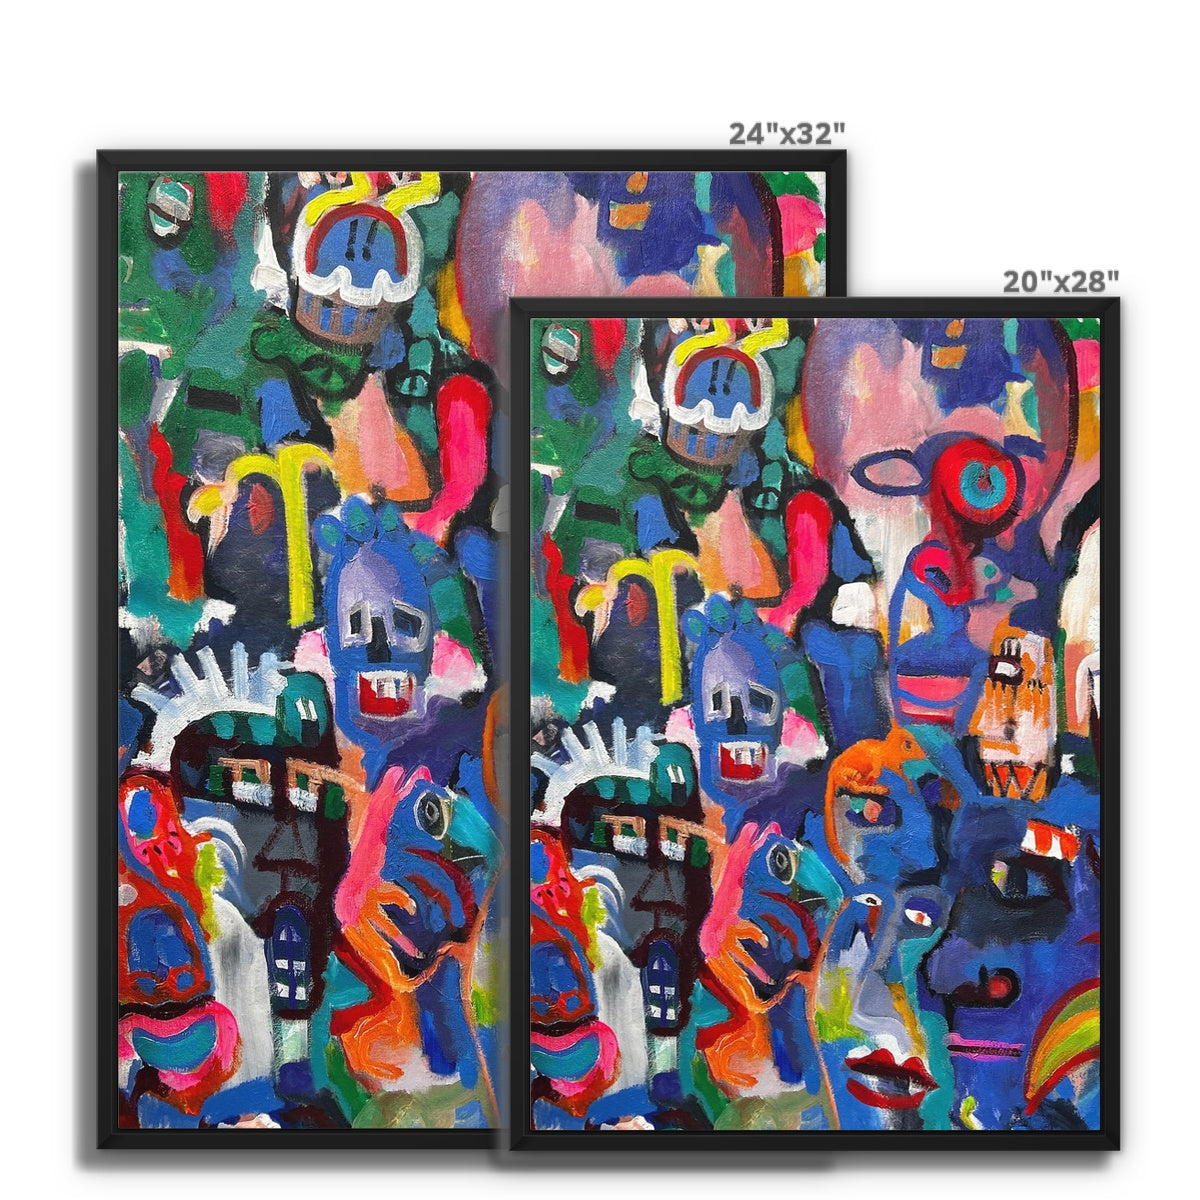 Two framed canvas prints showing naïve style abstract artwork in sizes 24"x 32” and 20 inch x 28" inches, colourful outsider art, abstract style featuring naïve faces, in landscape formats. 